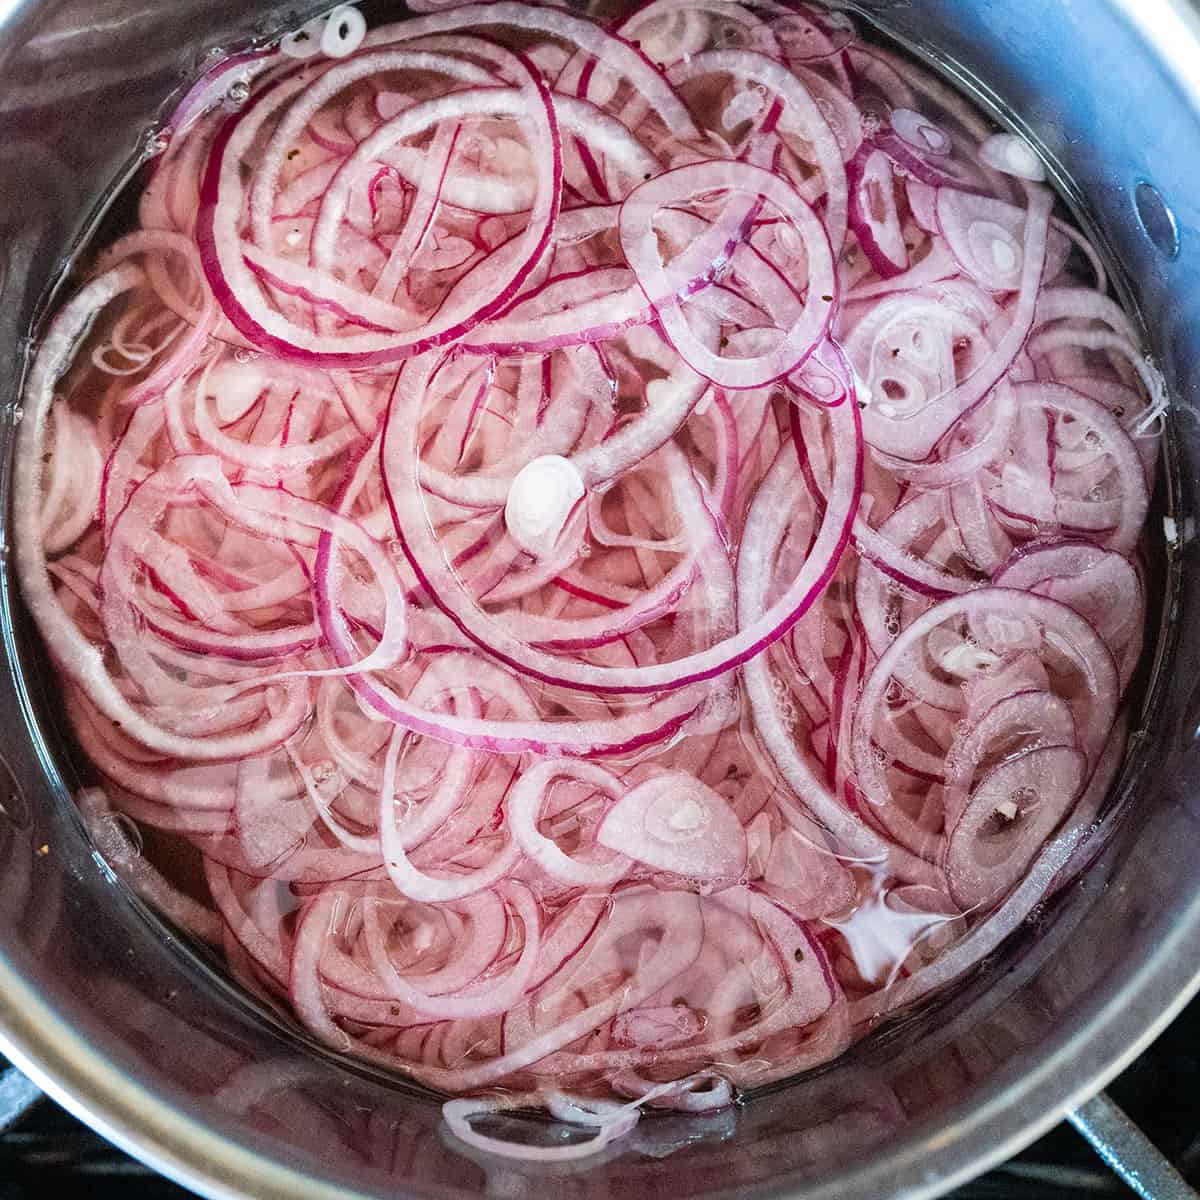 Sliced red onions in pot of brine.